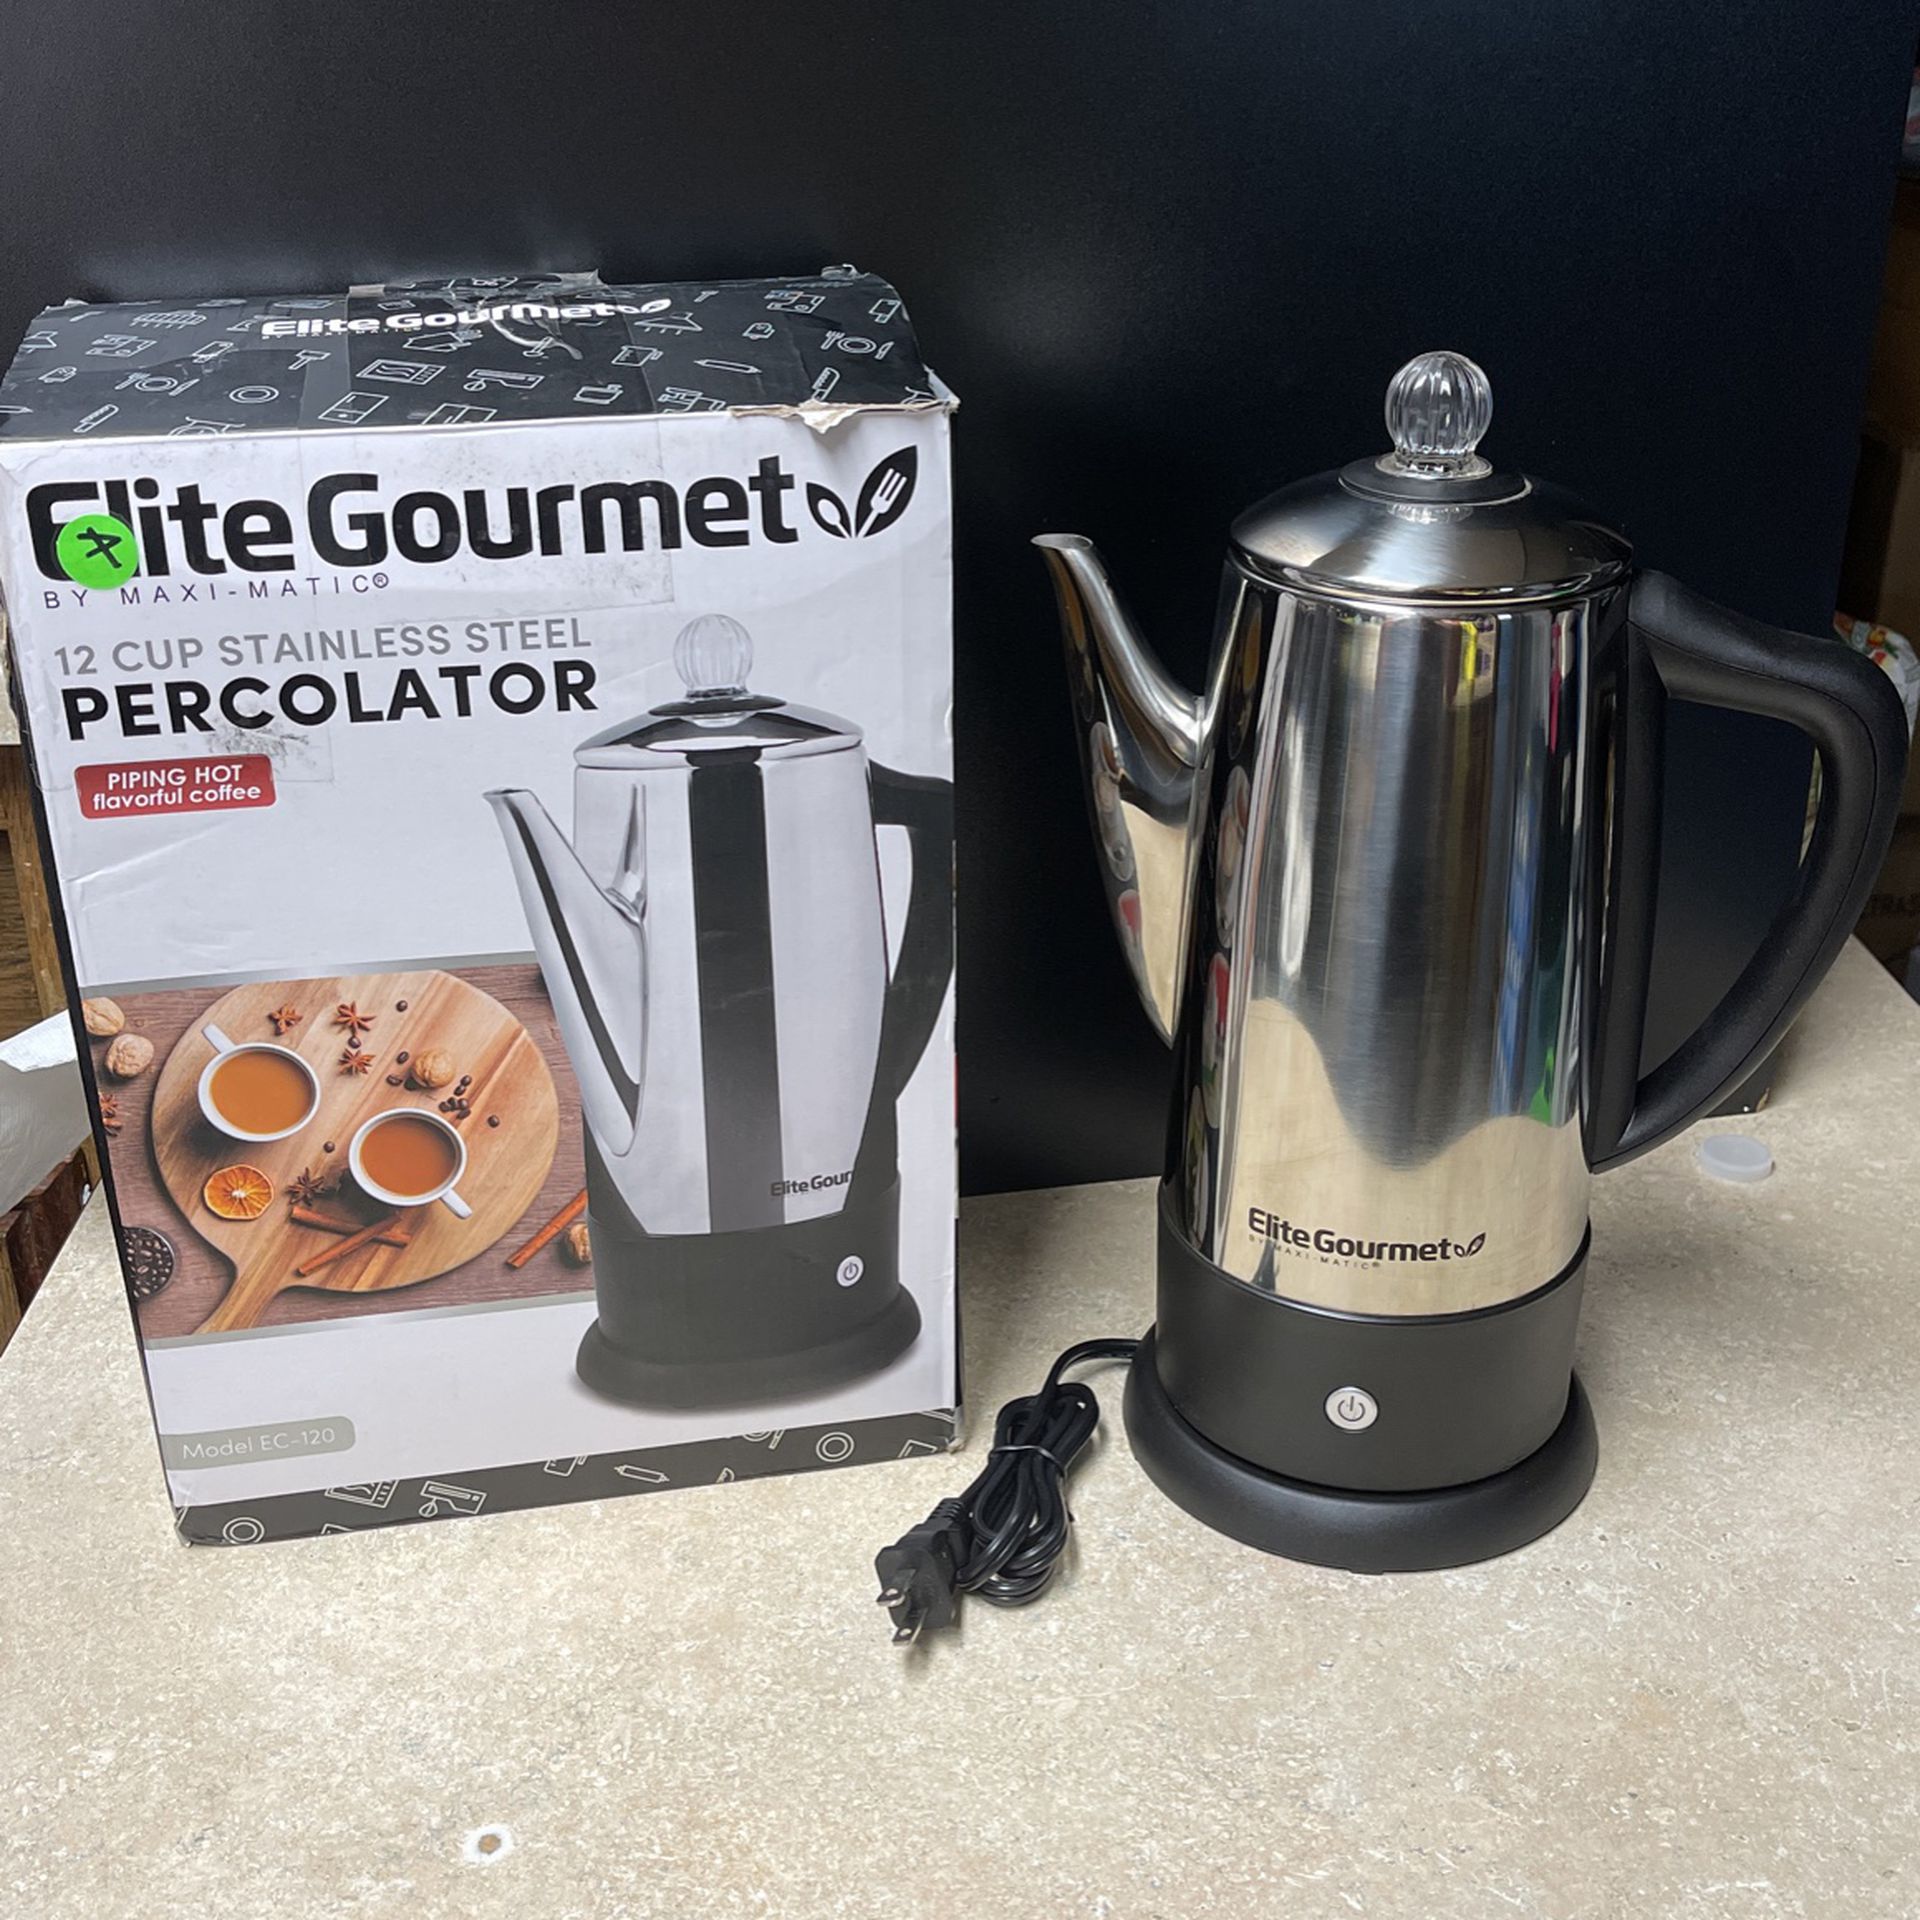 Elite Gourmet By Maxi-Magic 12 Cup Stainless Steel Percolator